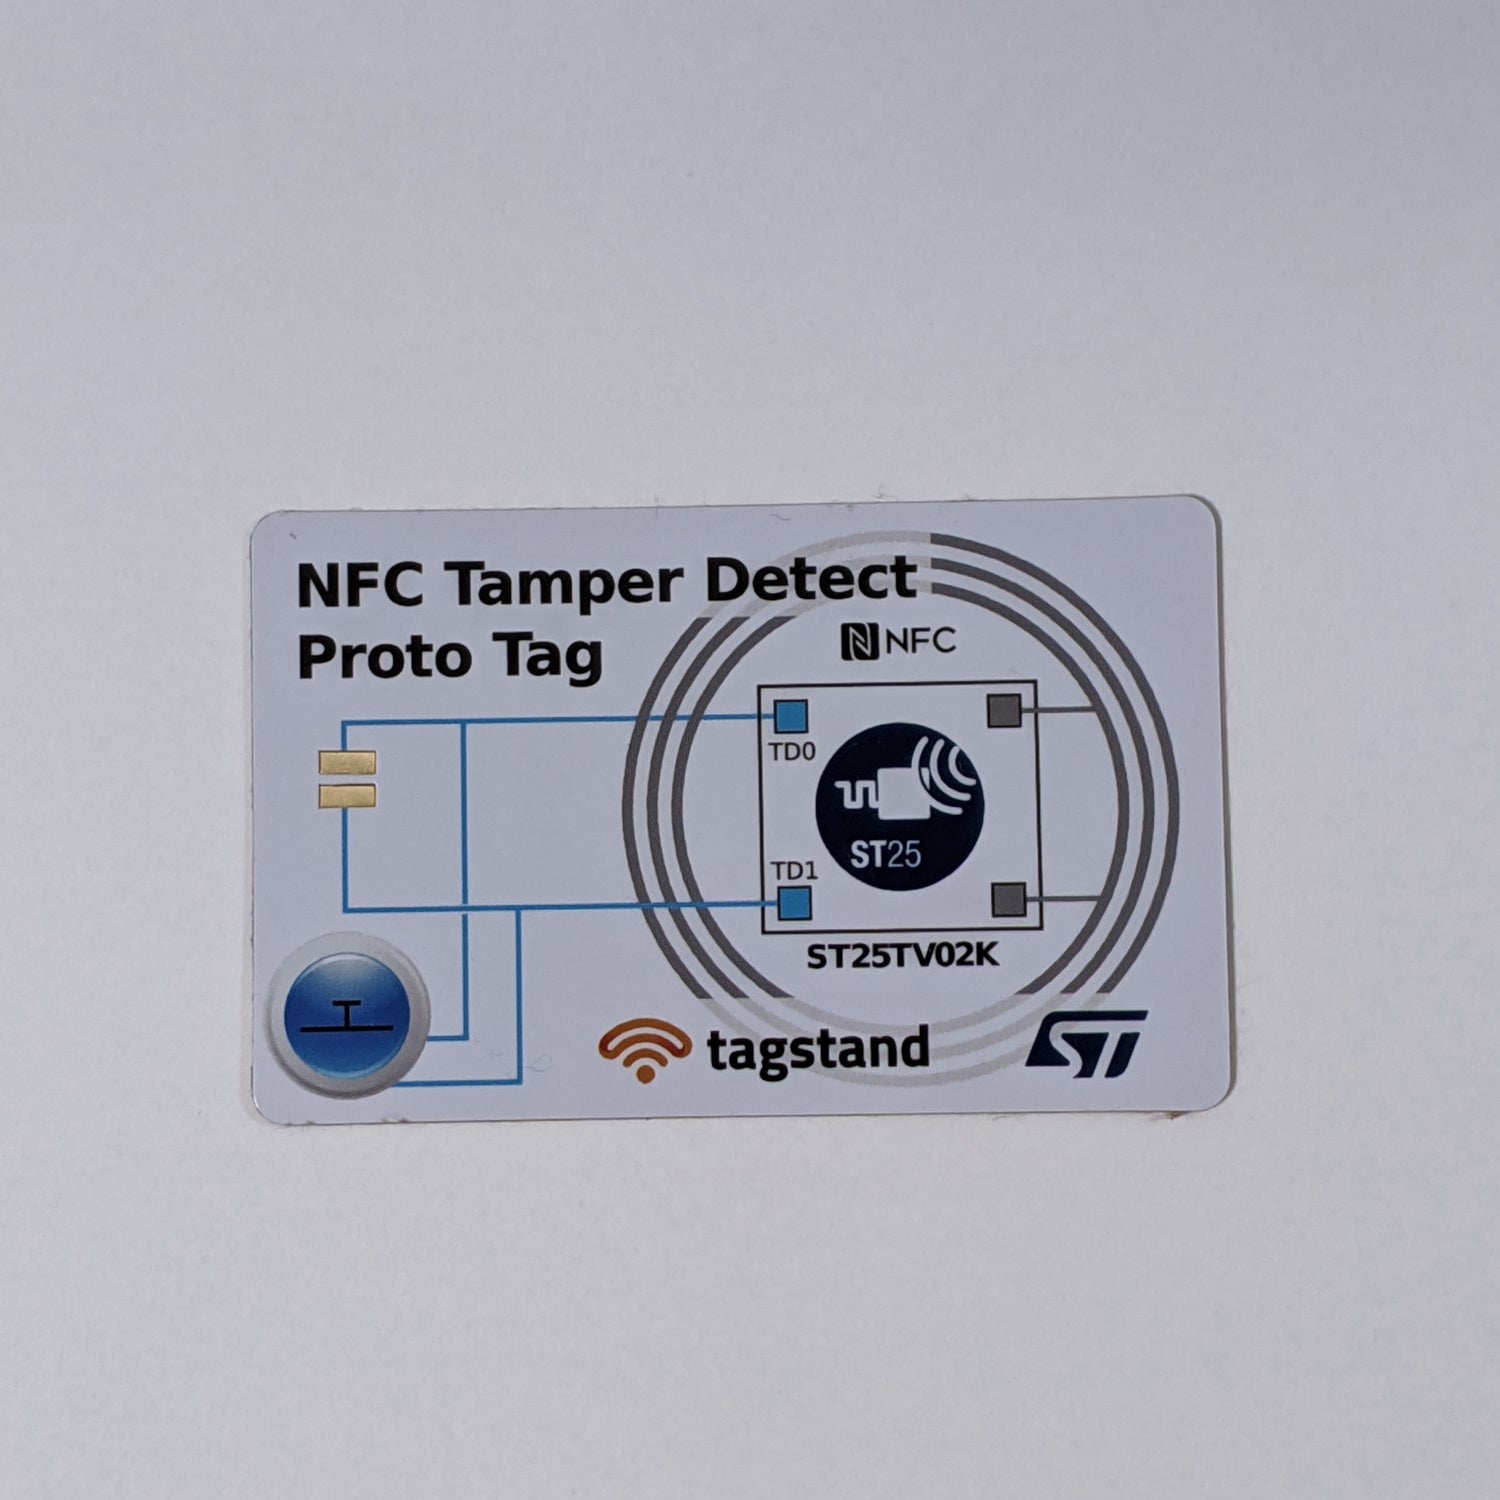 ST25TV02K Tamper-detect Prototype Tag with manual switch and external contacts